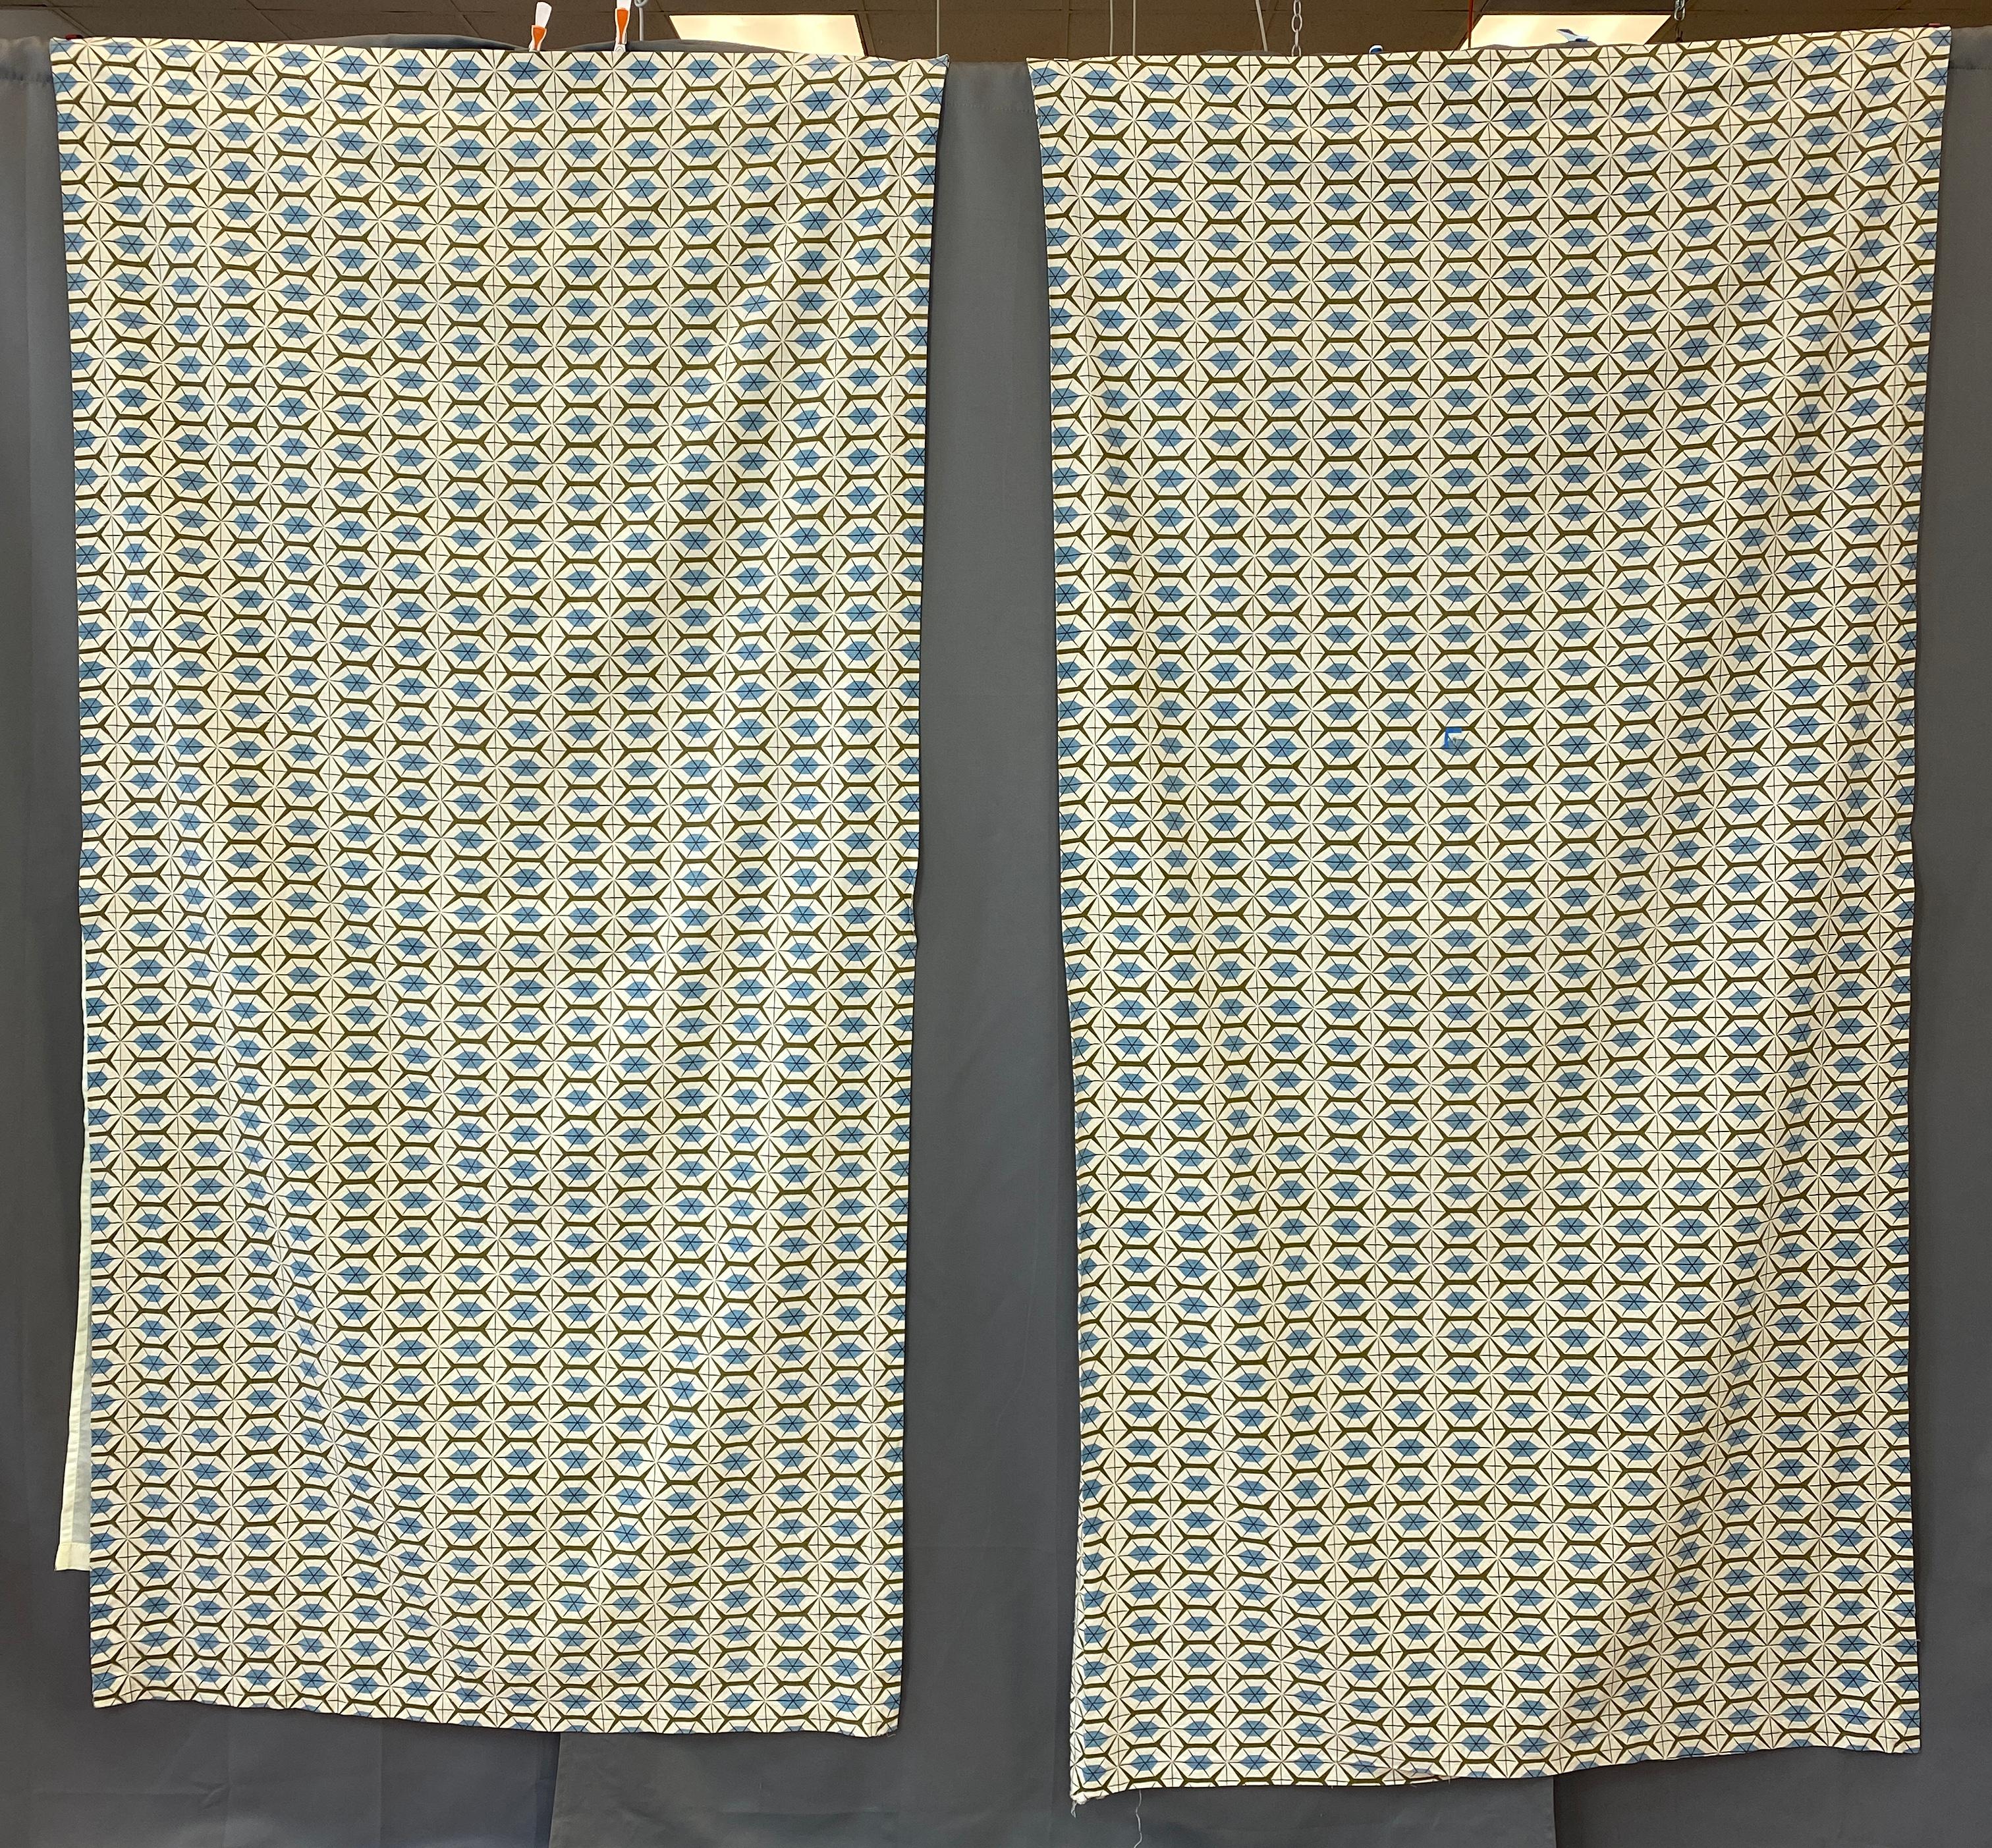 Offer here is a set of two Paul McCobb for Riverdale, fabric panels in the 